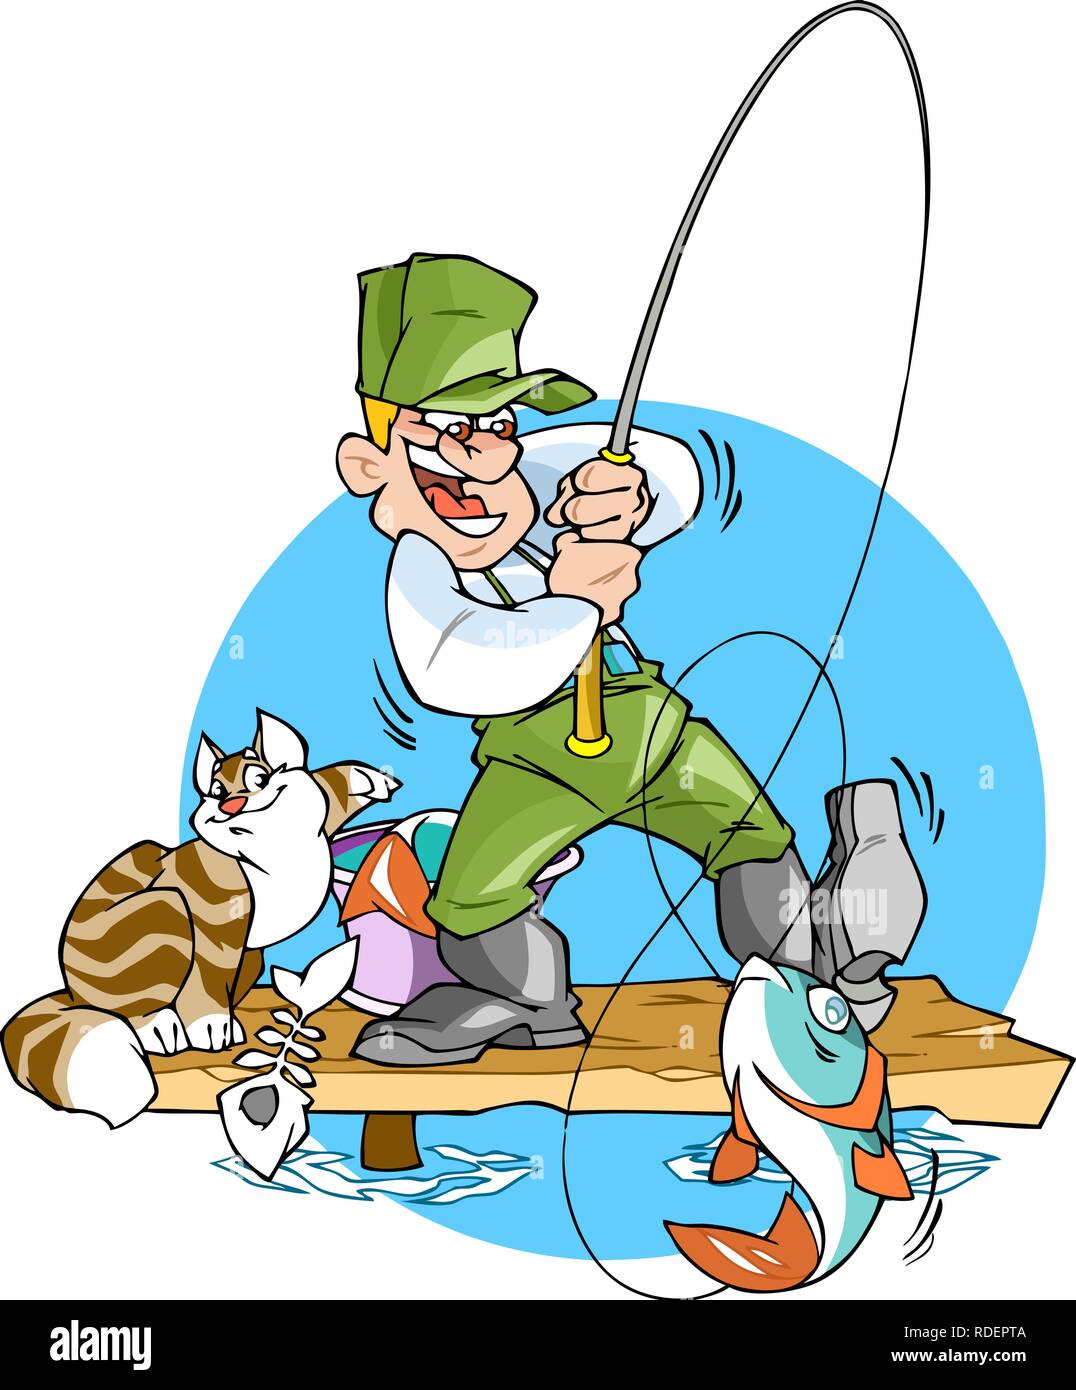 The vector illustration shows a man who is fishing for fishing. Near his cat steals a fish. The illustration is made in cartoon style. Stock Vector